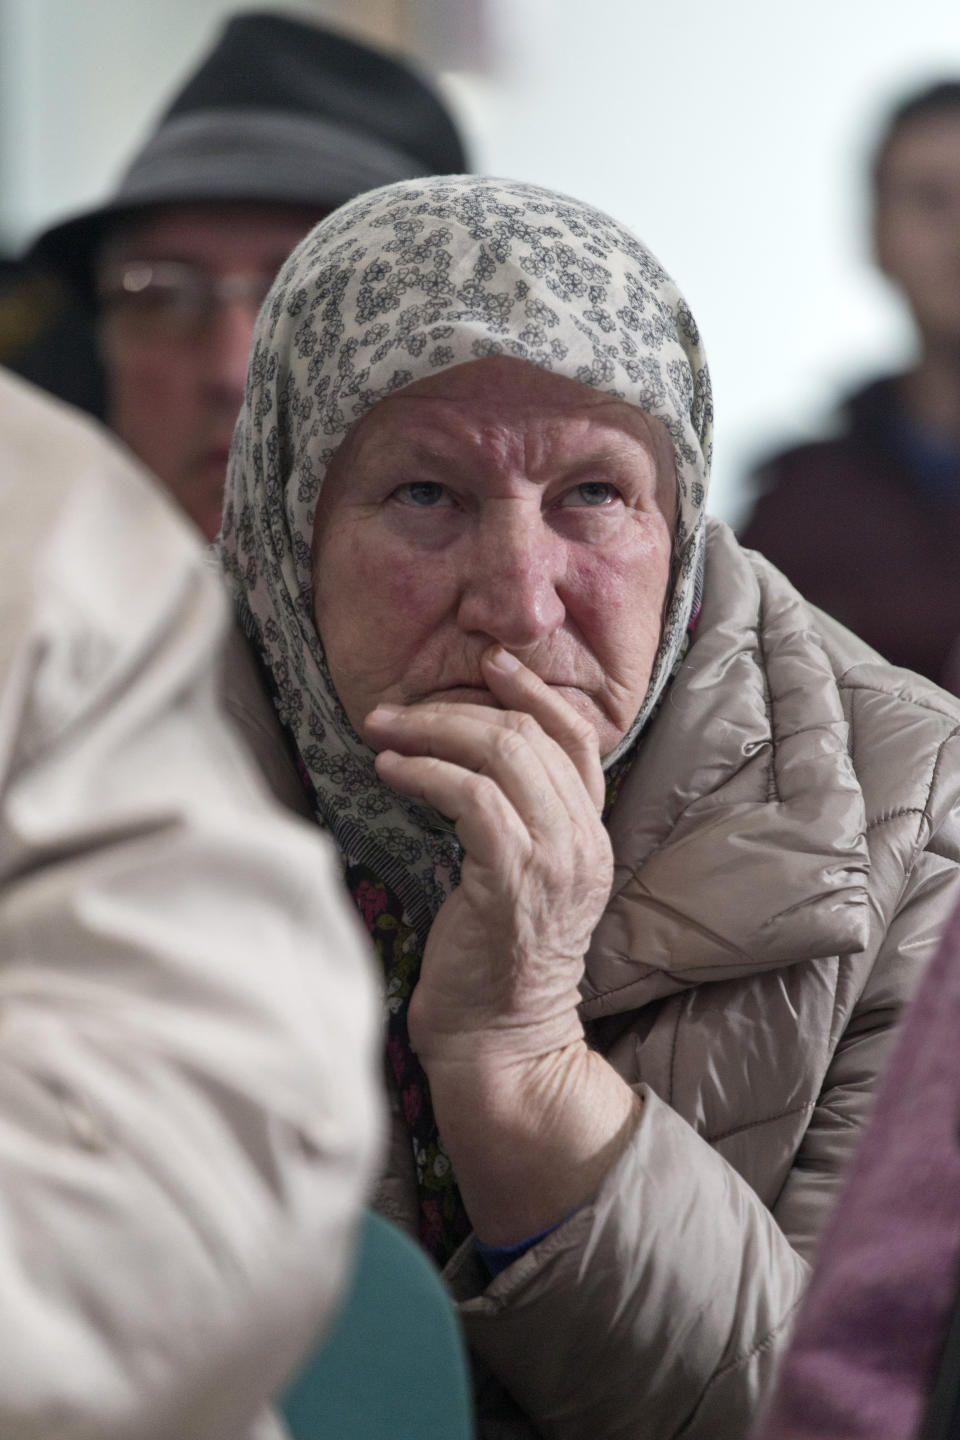 A relative of victims of the Srebrenica genocide awaits the decision of the UN appeals judges on former Bosnian Serb leader Radovan Karadzic in Potocari, Bosnia and Herzegovina, Wednesday, March 20, 2019. United Nations appeals judges on Wednesday upheld the convictions of Karadzic for genocide, war crimes and crimes against humanity, and increased his sentence from 40 years to life imprisonment. (AP Photo/Marko Drobnjakovic)